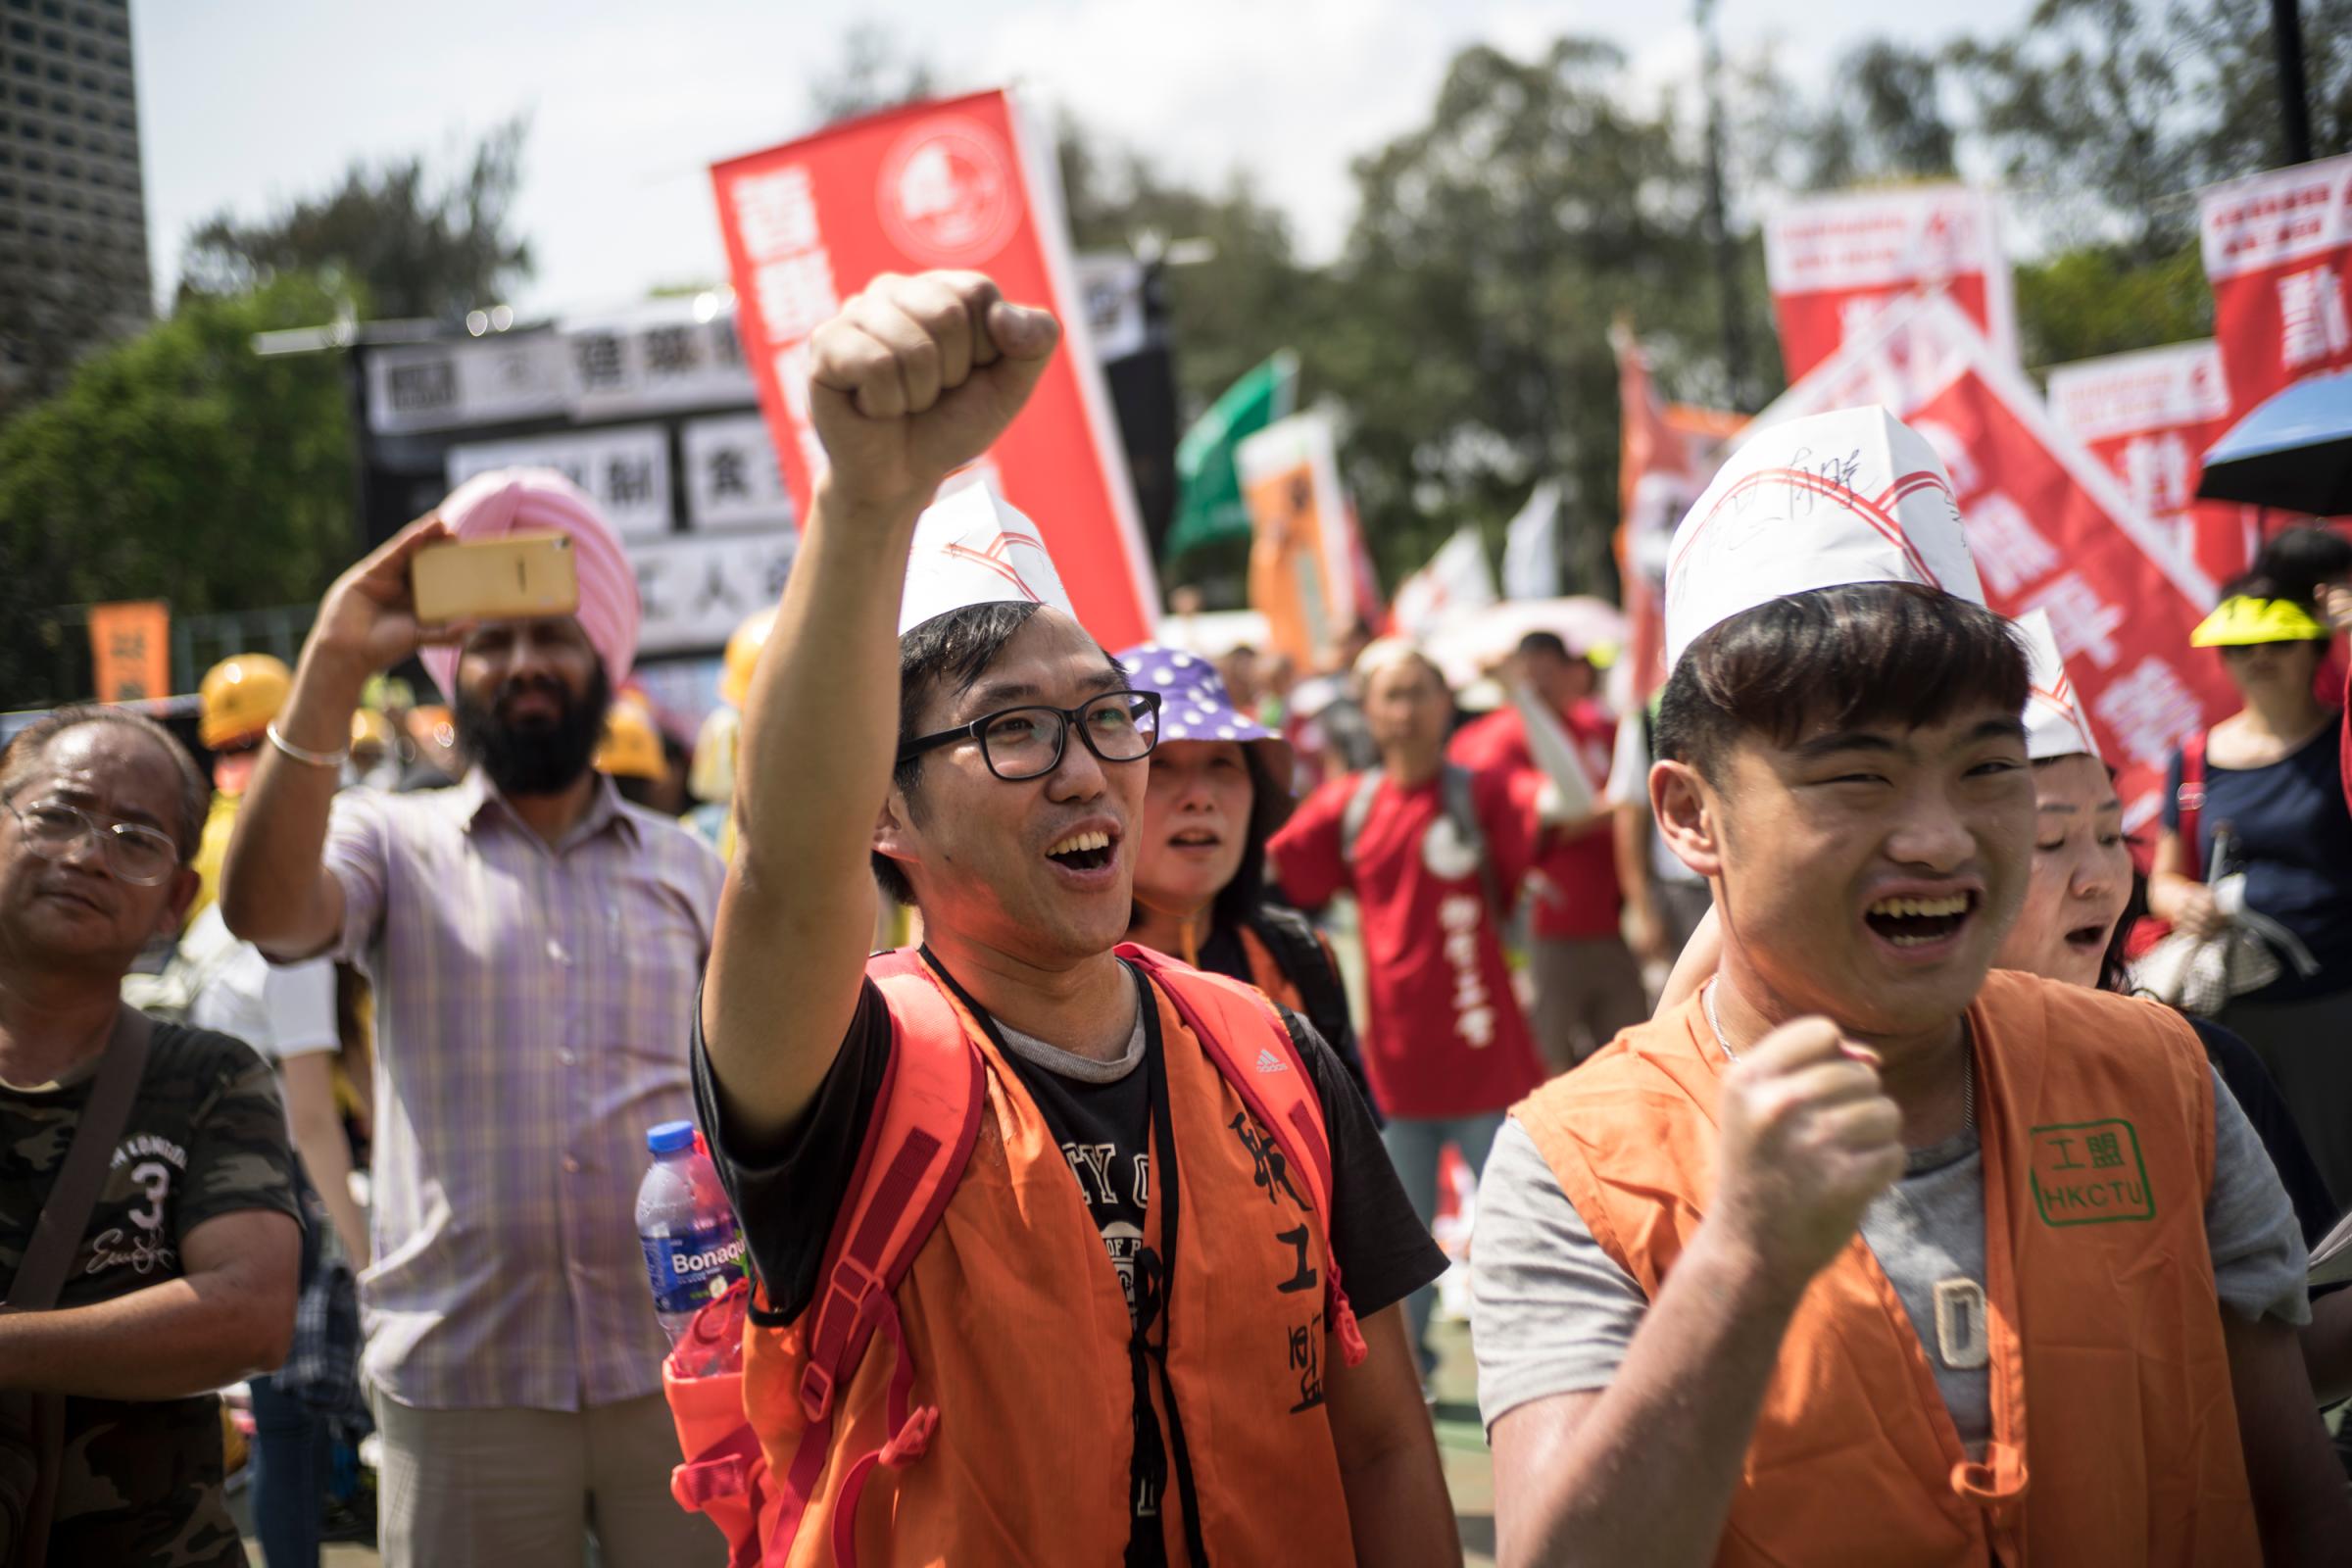 Protesters participated in a Labor Day protest. Participants